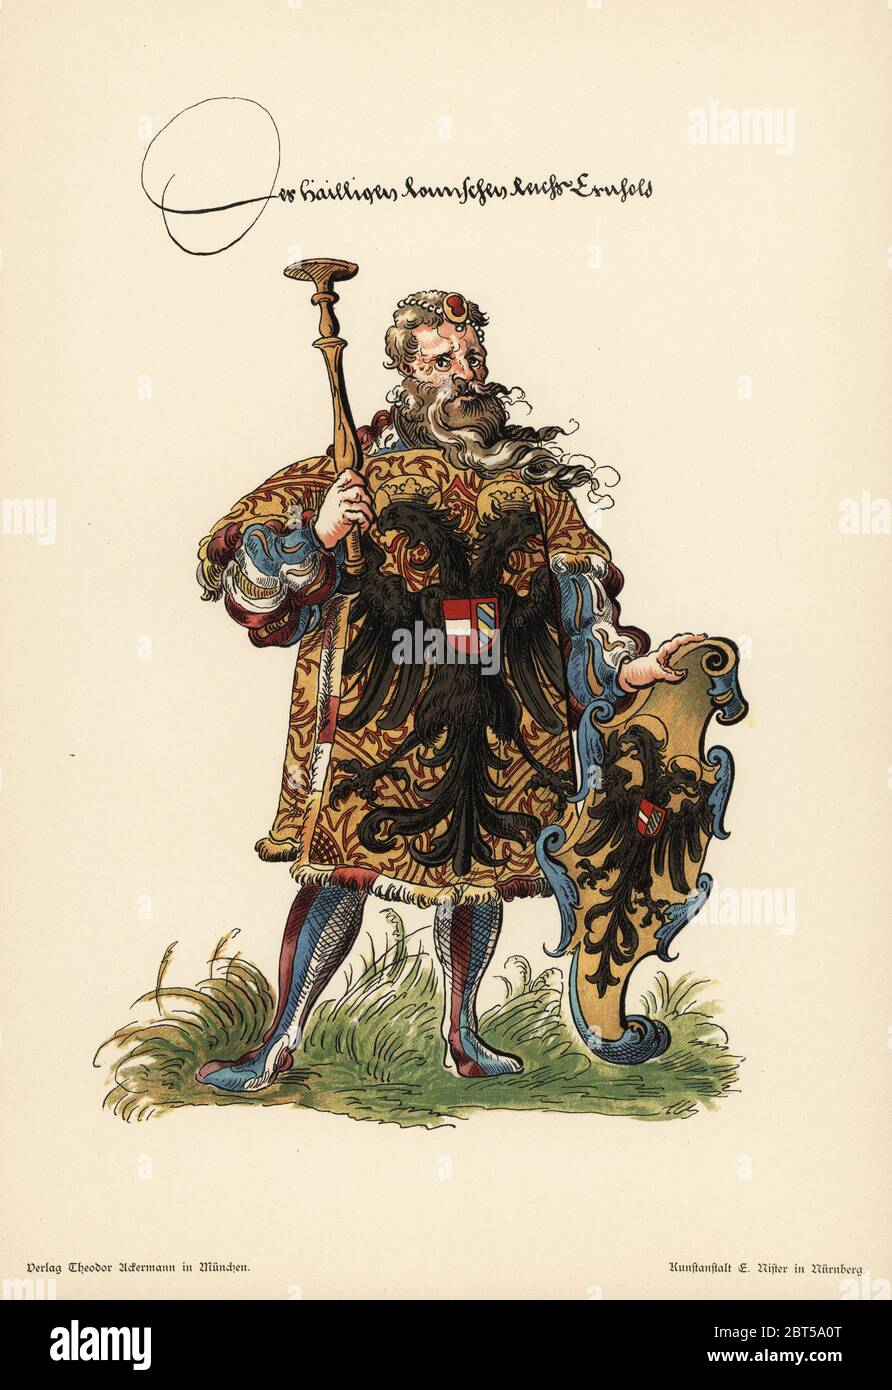 Herald of the Holy Roman Empire; Herold der heiliges Romisches Reich. He wears an armorial tunic and carries an escutcheon with the black double-headed eagle on gold field. Chromolithograph from Otto Watzelberger's Beitraege zum Formenschatz der Heraldik (Contributions to the Vocabulary of Heraldry), Theodor Ackermann, Munich, 1900. Otto Watzelberger was Secretary of the Koeniglich Bayerischen Haus-Ritter-Ordens vom heiligen Georg (Royal Bavarian House Equestrian Order of Saint George). Stock Photo